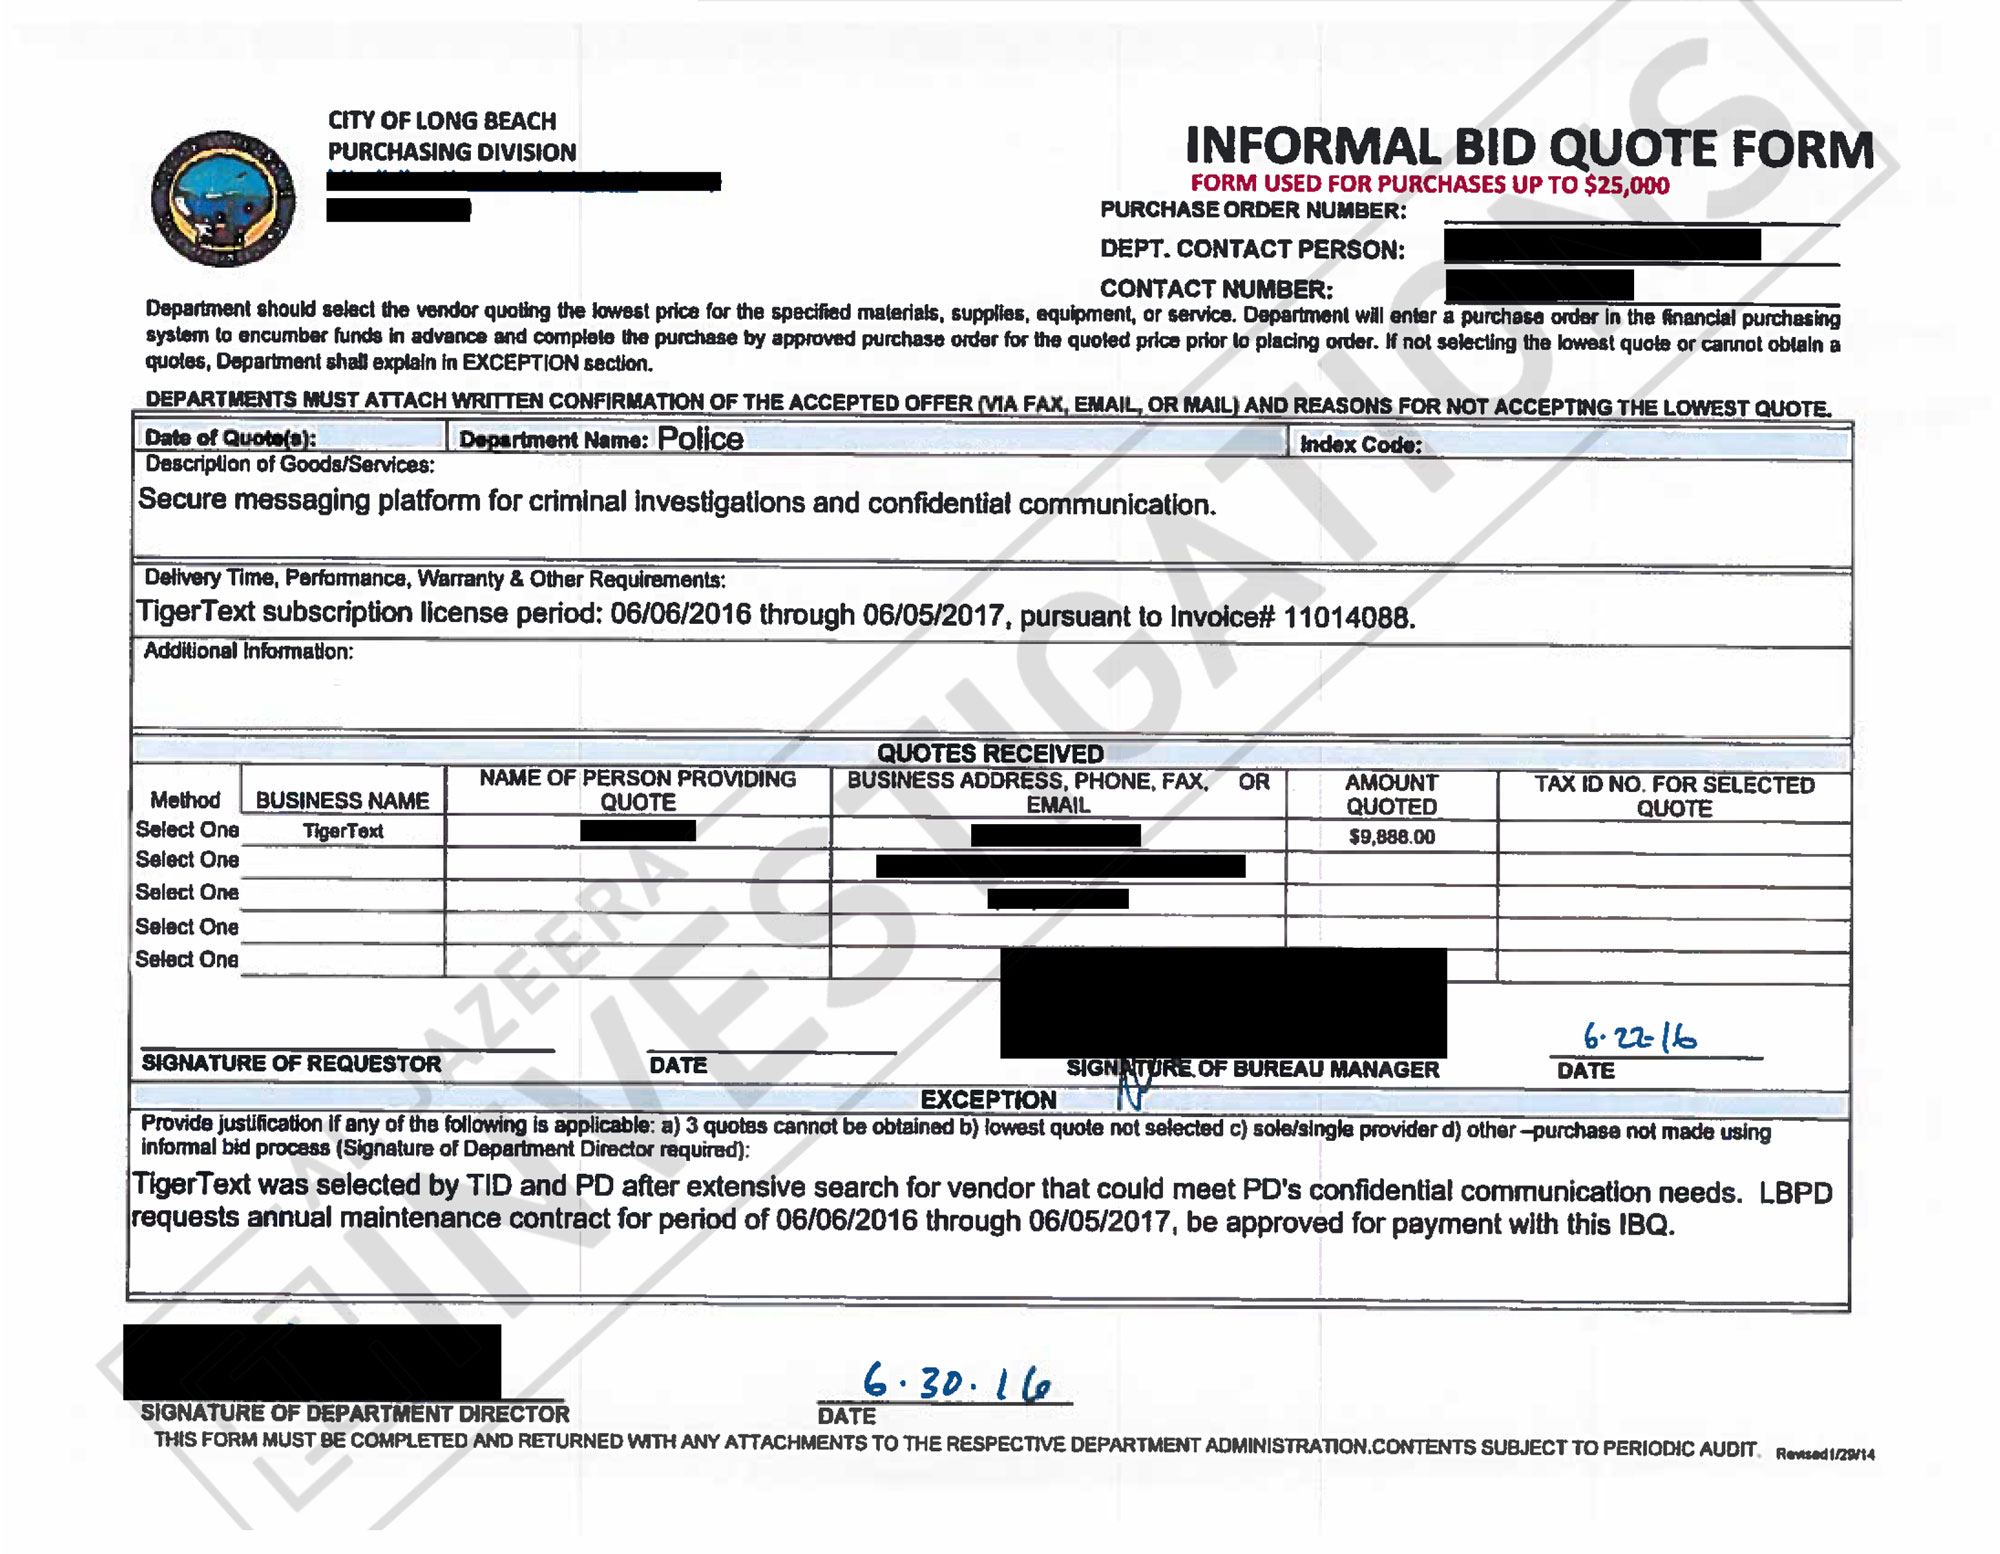 An invoice from 2016 shows the city of Long Beach spends around $10,000 USD each year for the text messaging platform. 